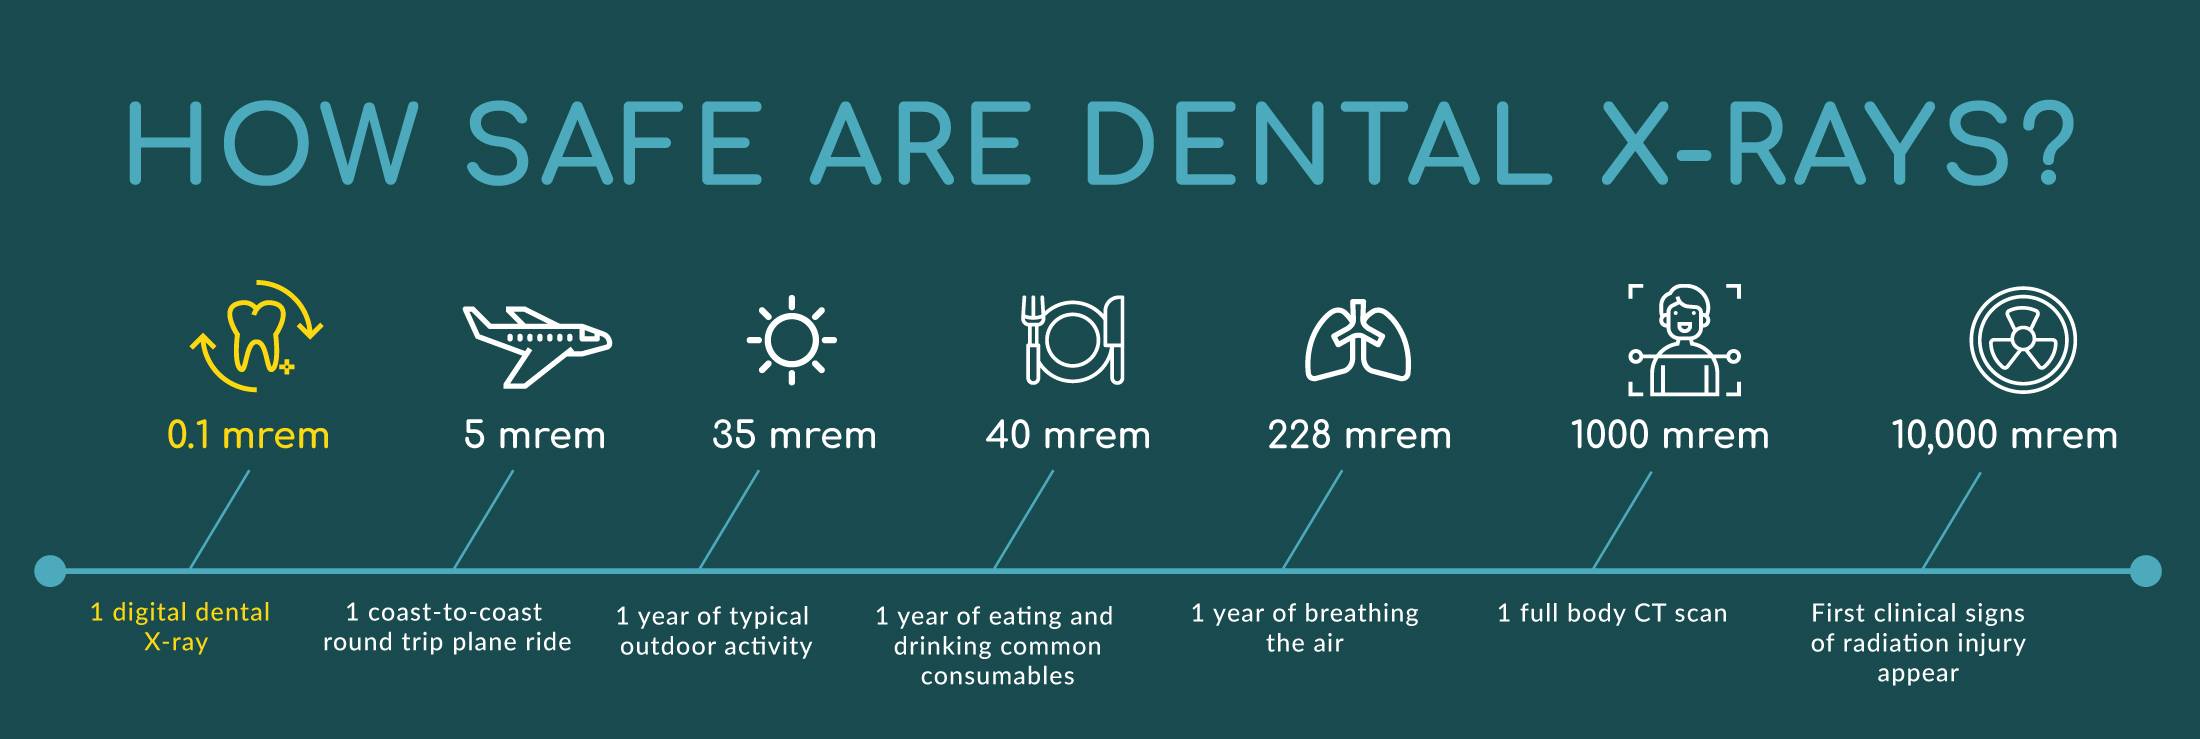 Safety infographic indicates that dental x-rays are less harmful than flying, being outdoors, eating, and breathing.